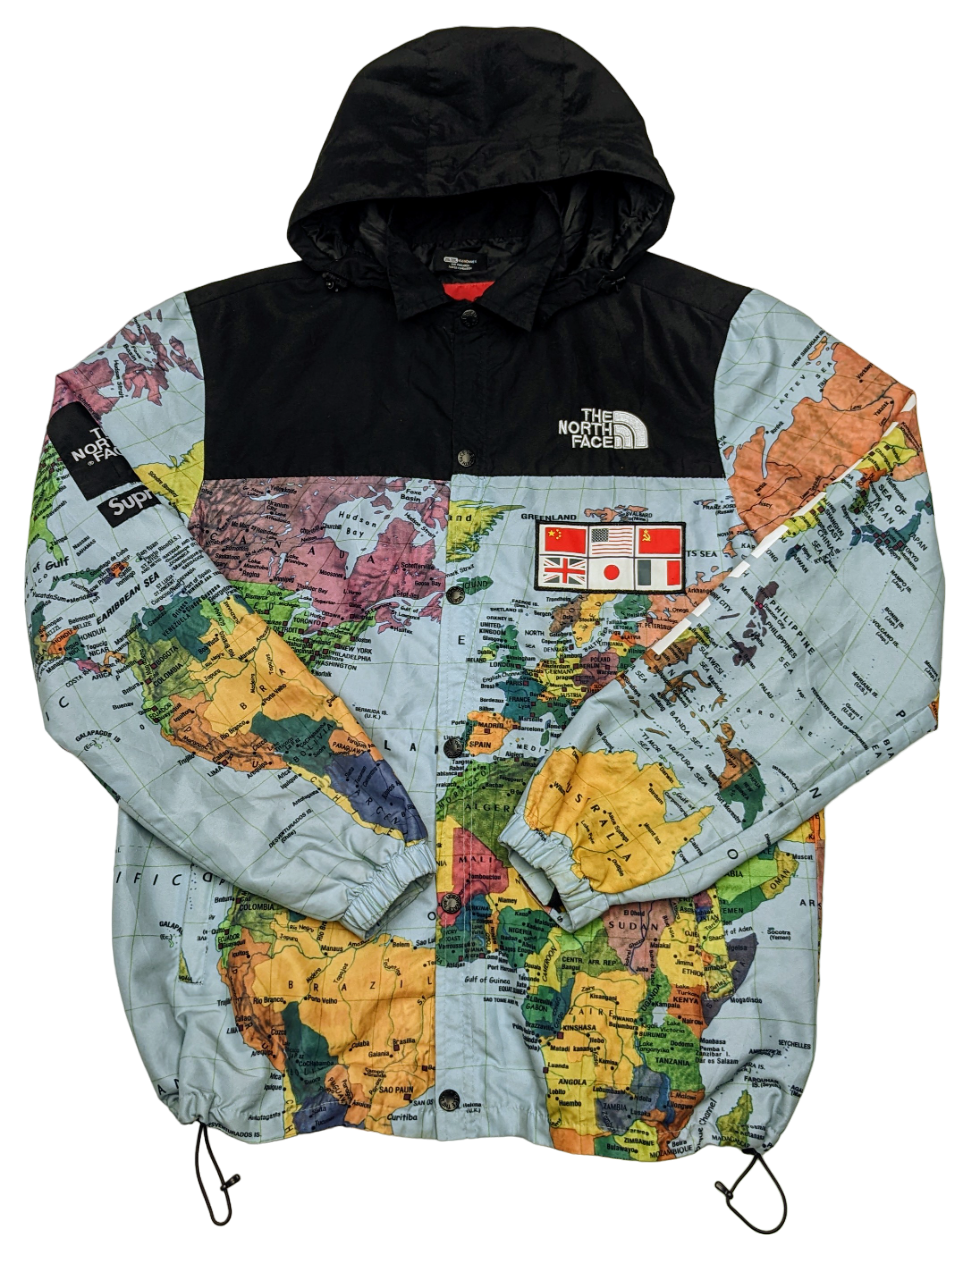 Supreme The North Face Map Coaches Jacket 1 pc 3 lbs S1222103 - Raghouse